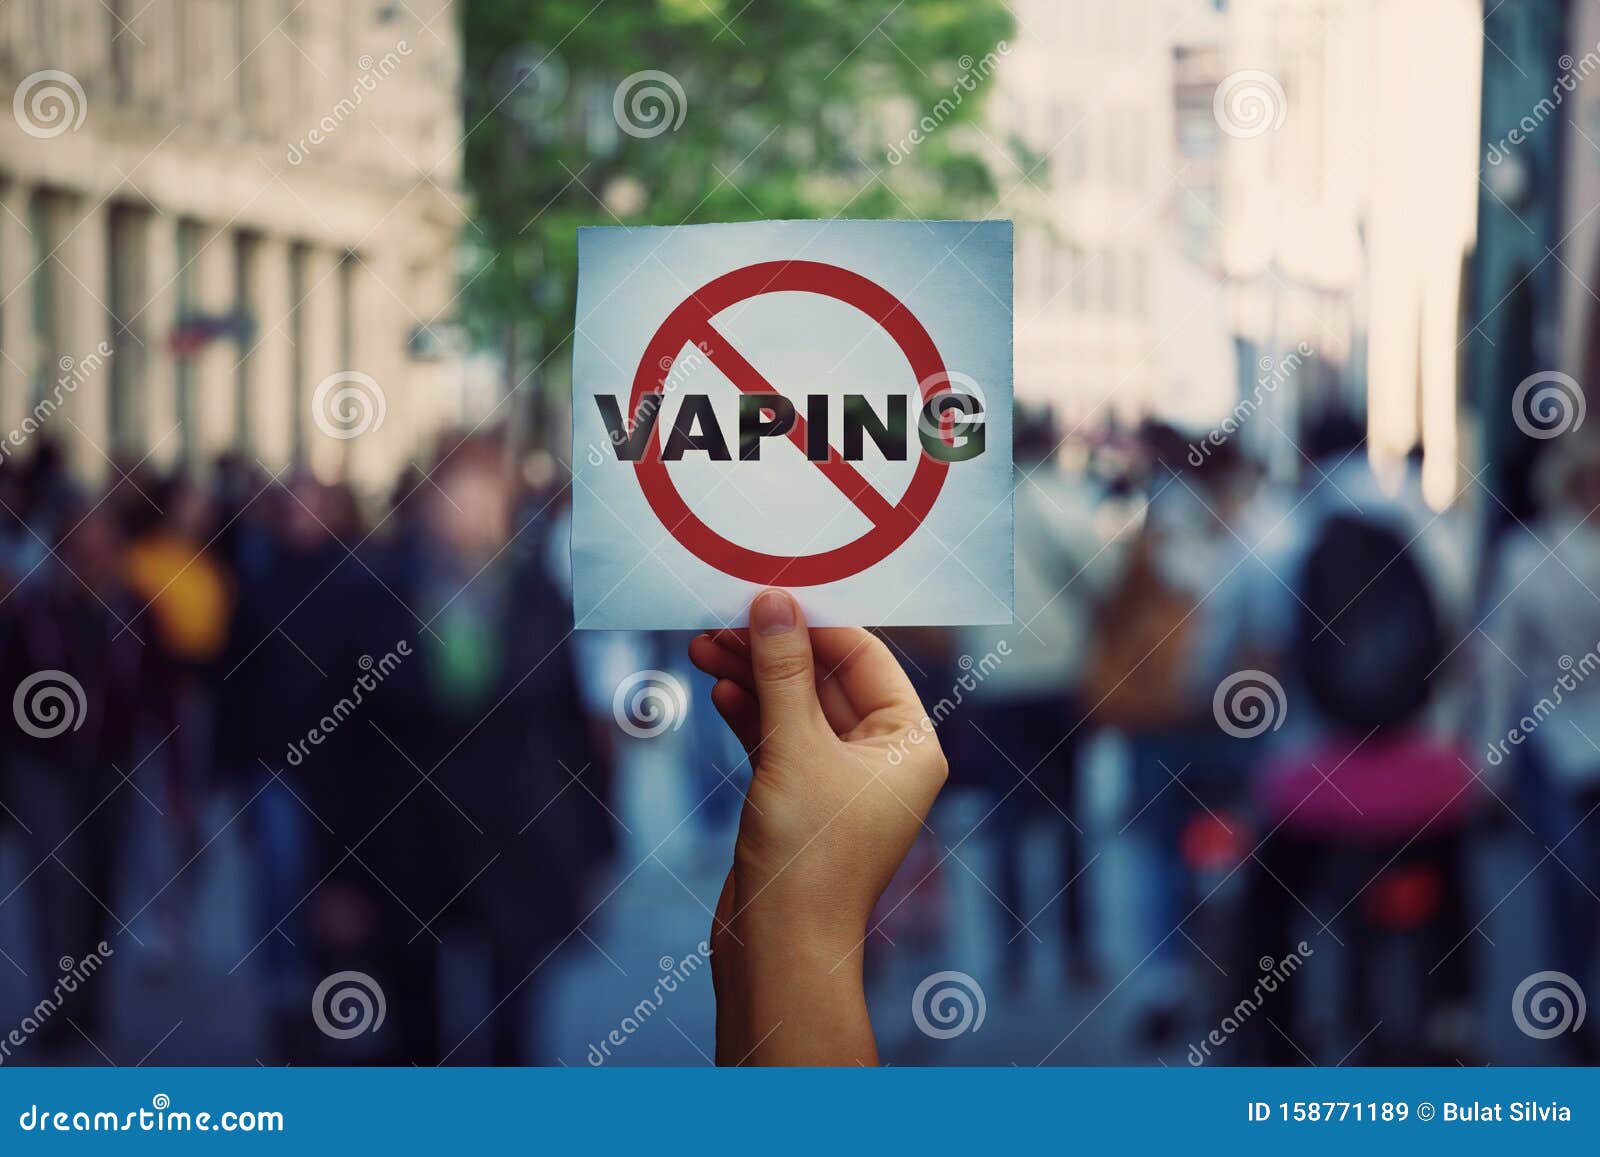 human hand holding a protest banner stop vaping message over a crowded street background. banning flavored vaping products to